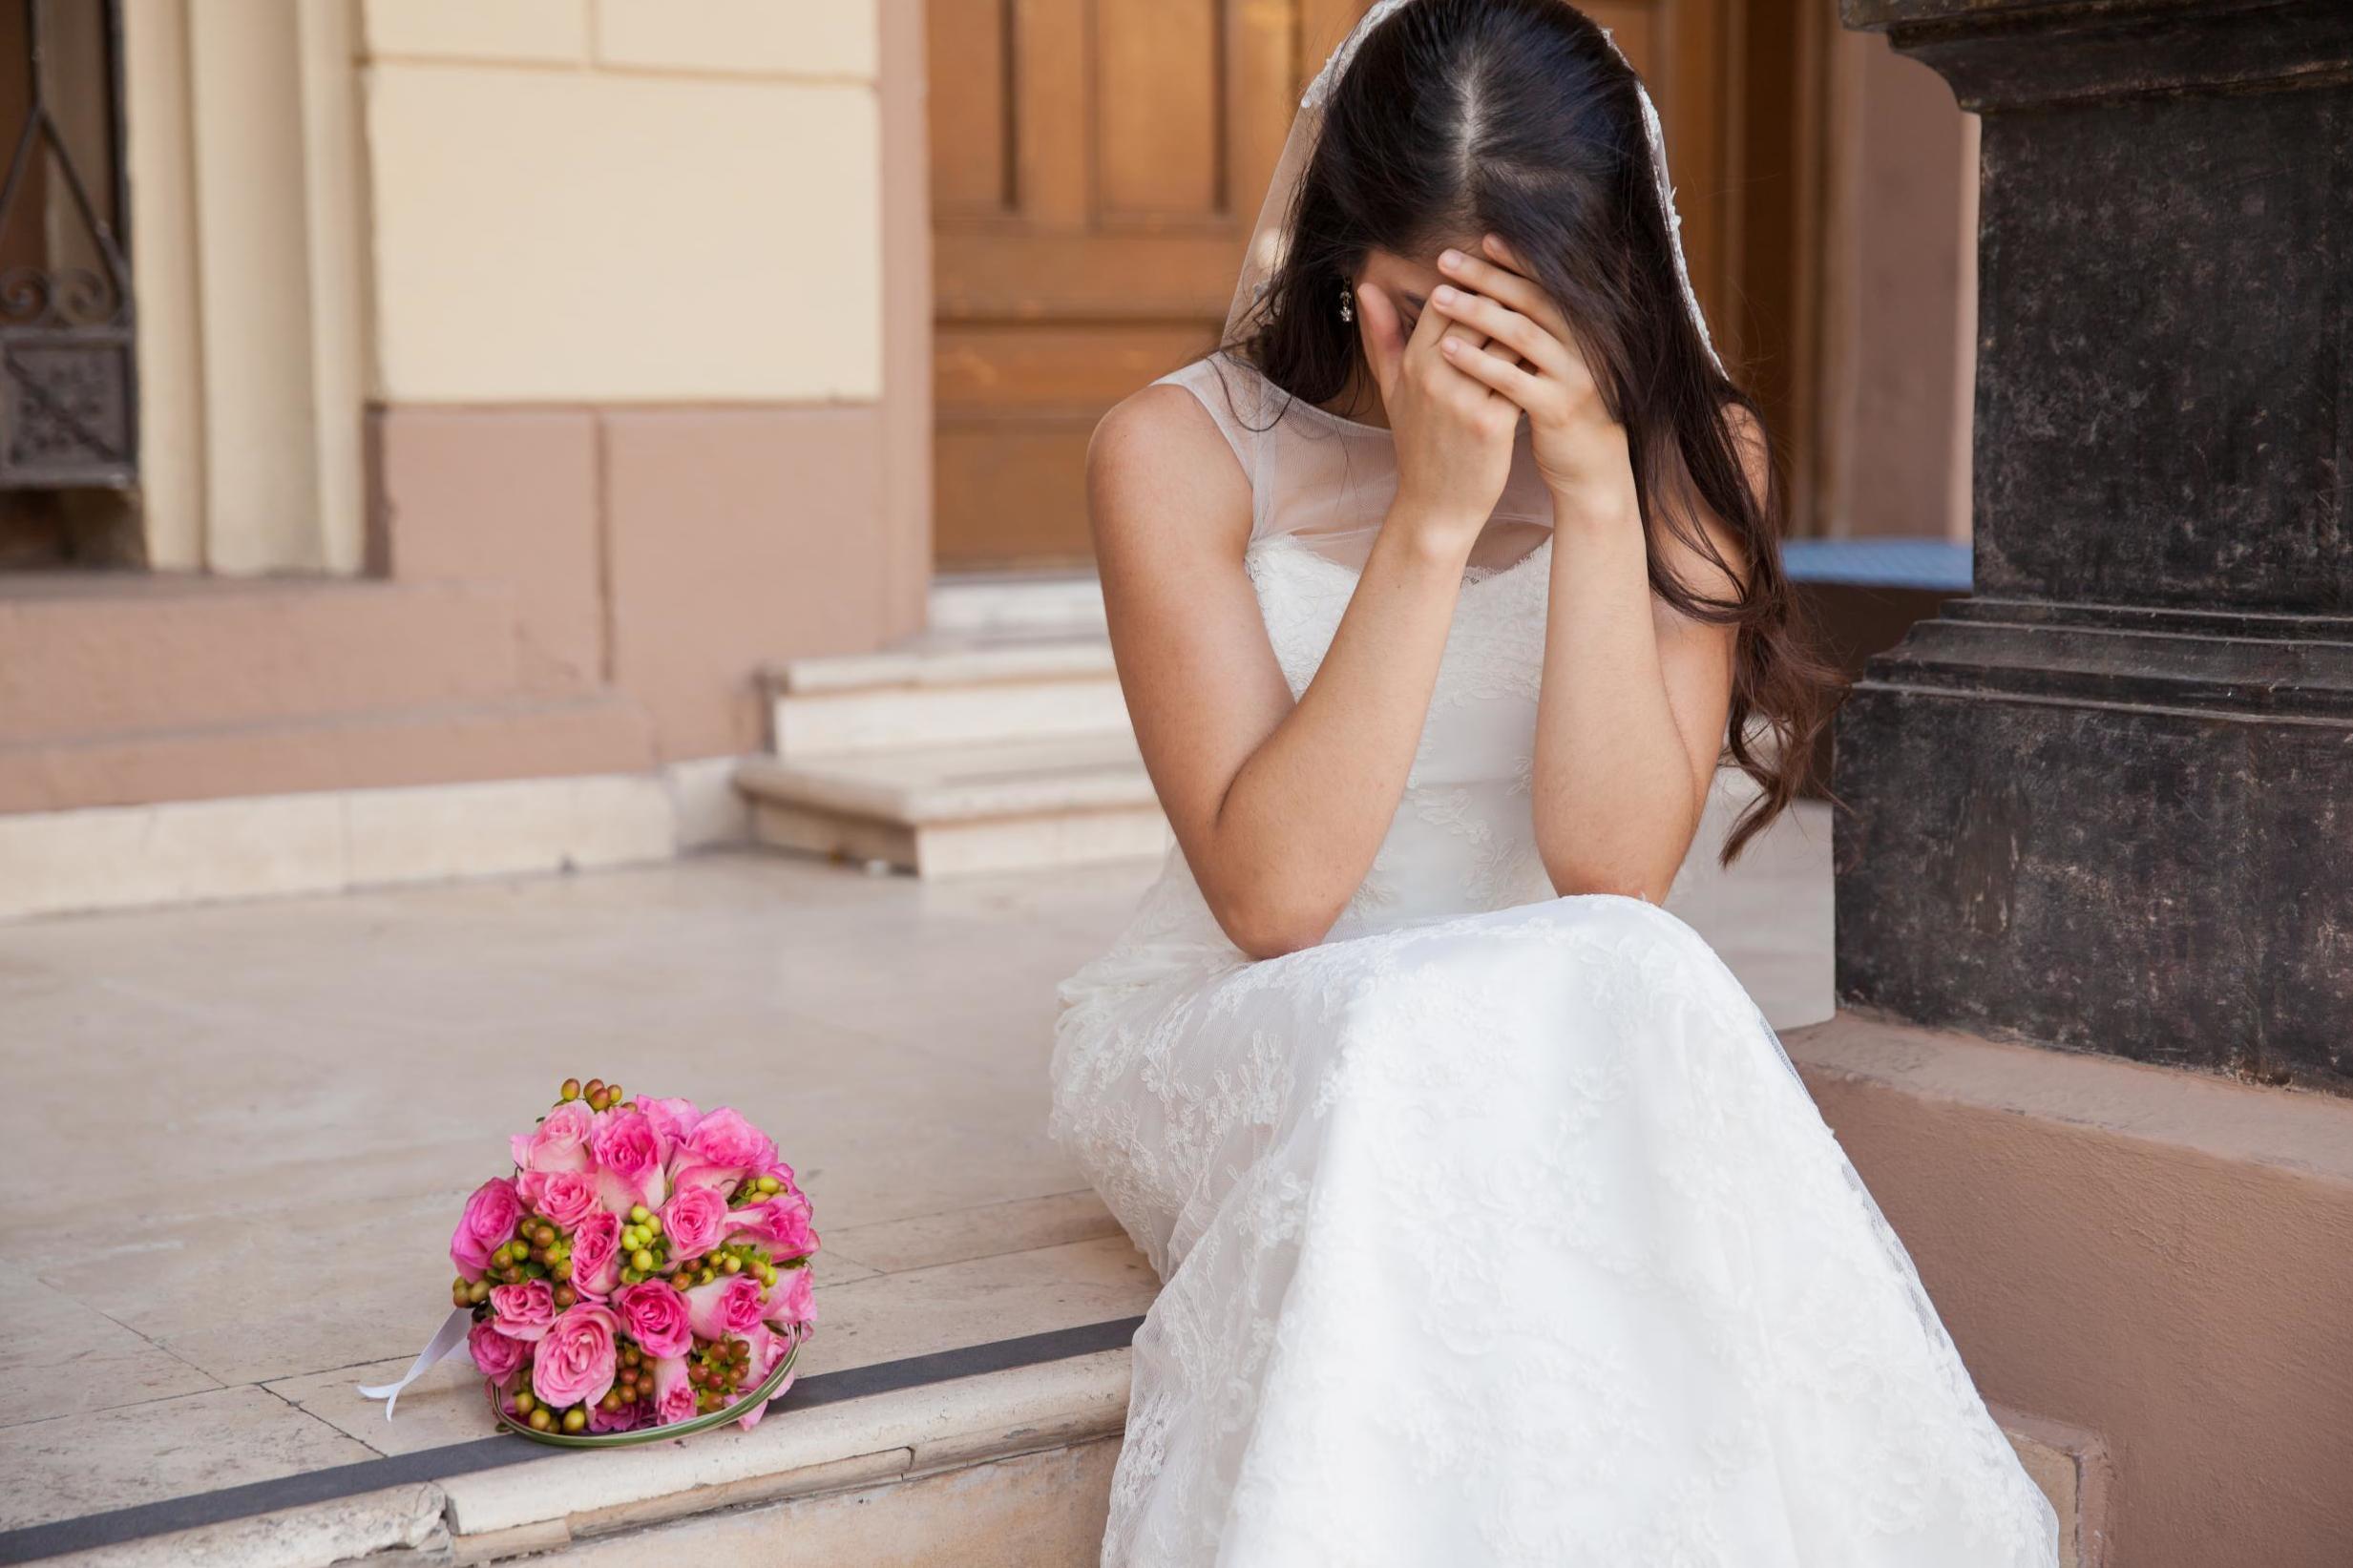 Bride-to-be upset over mother-in-law's white dress (Stock)